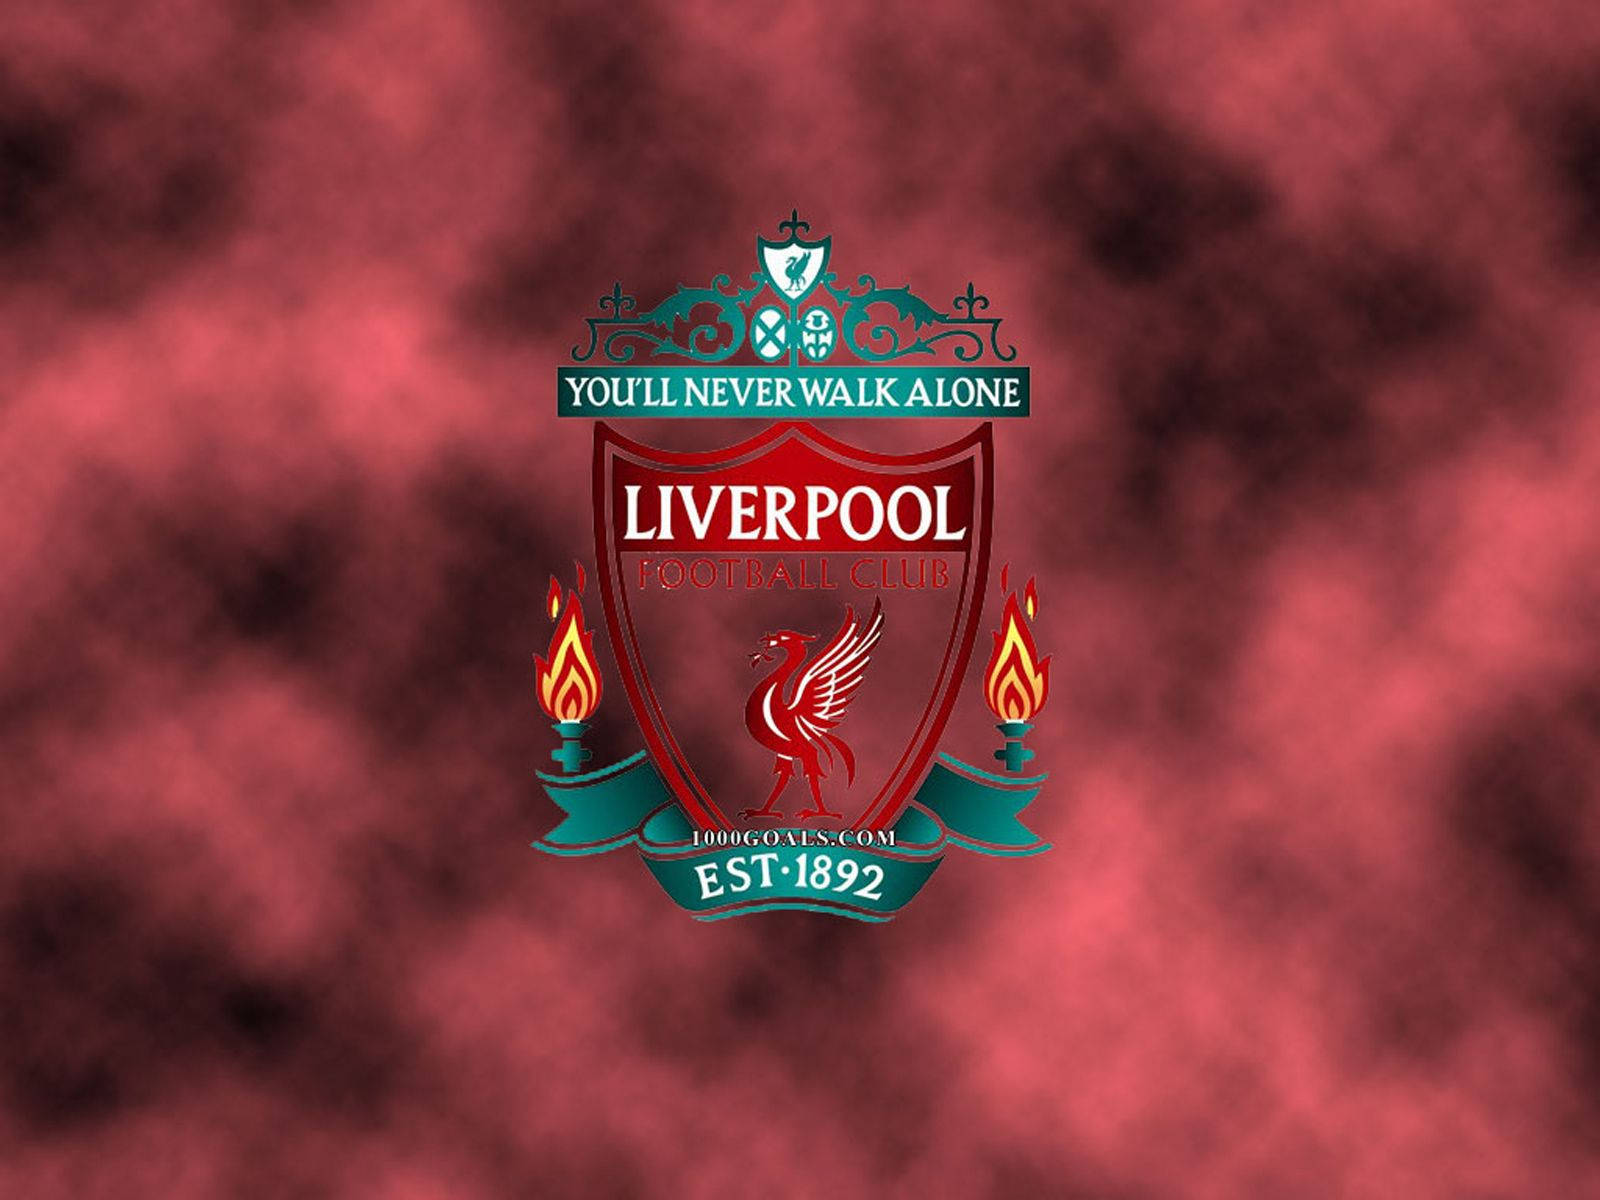 Fly the Red Flag High - Liverpool FC Logo Wallpaper